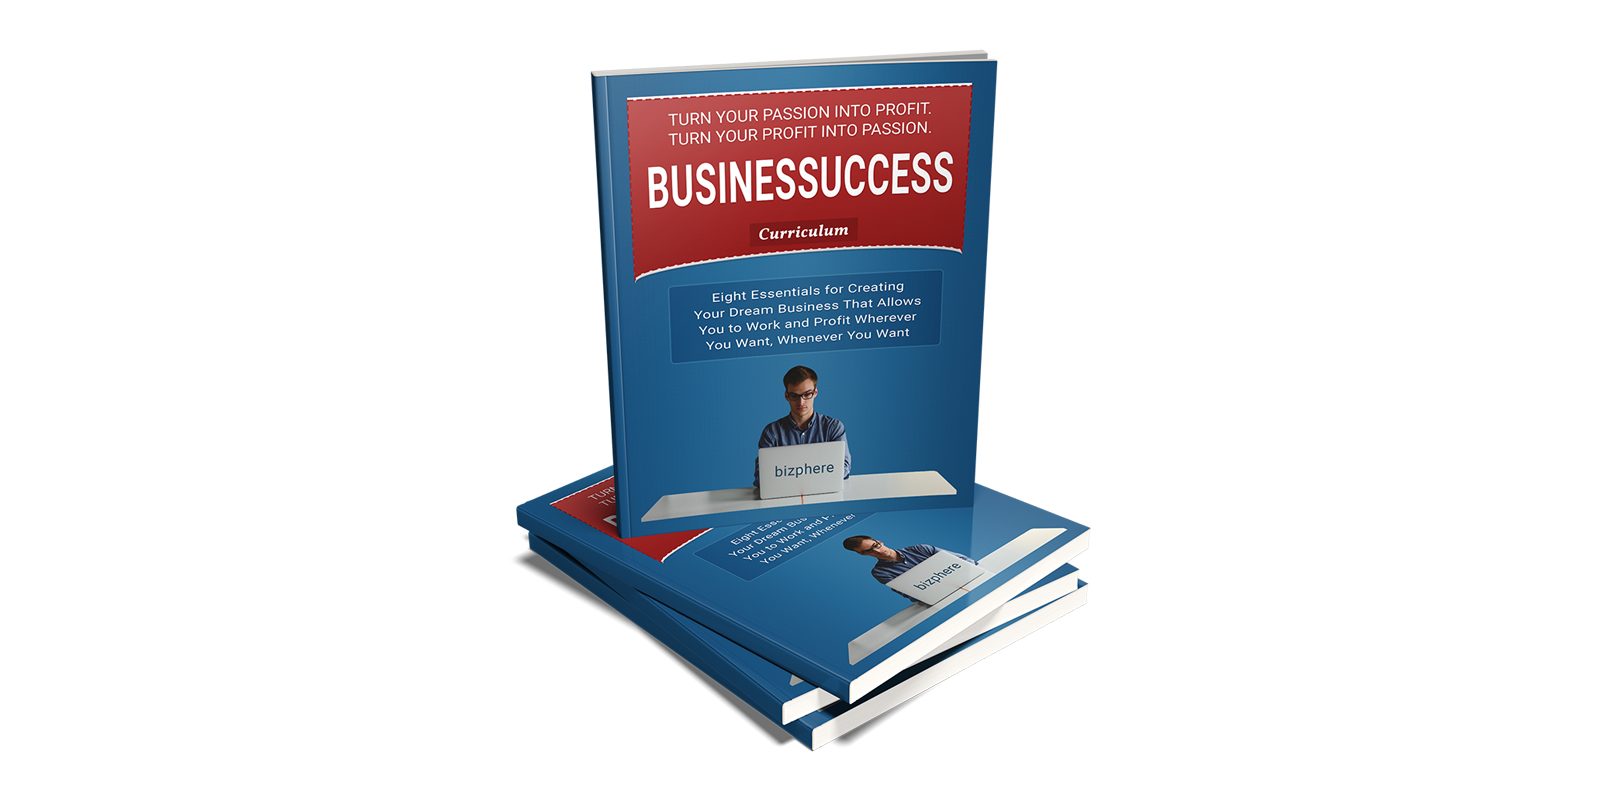 Businessuccess Review